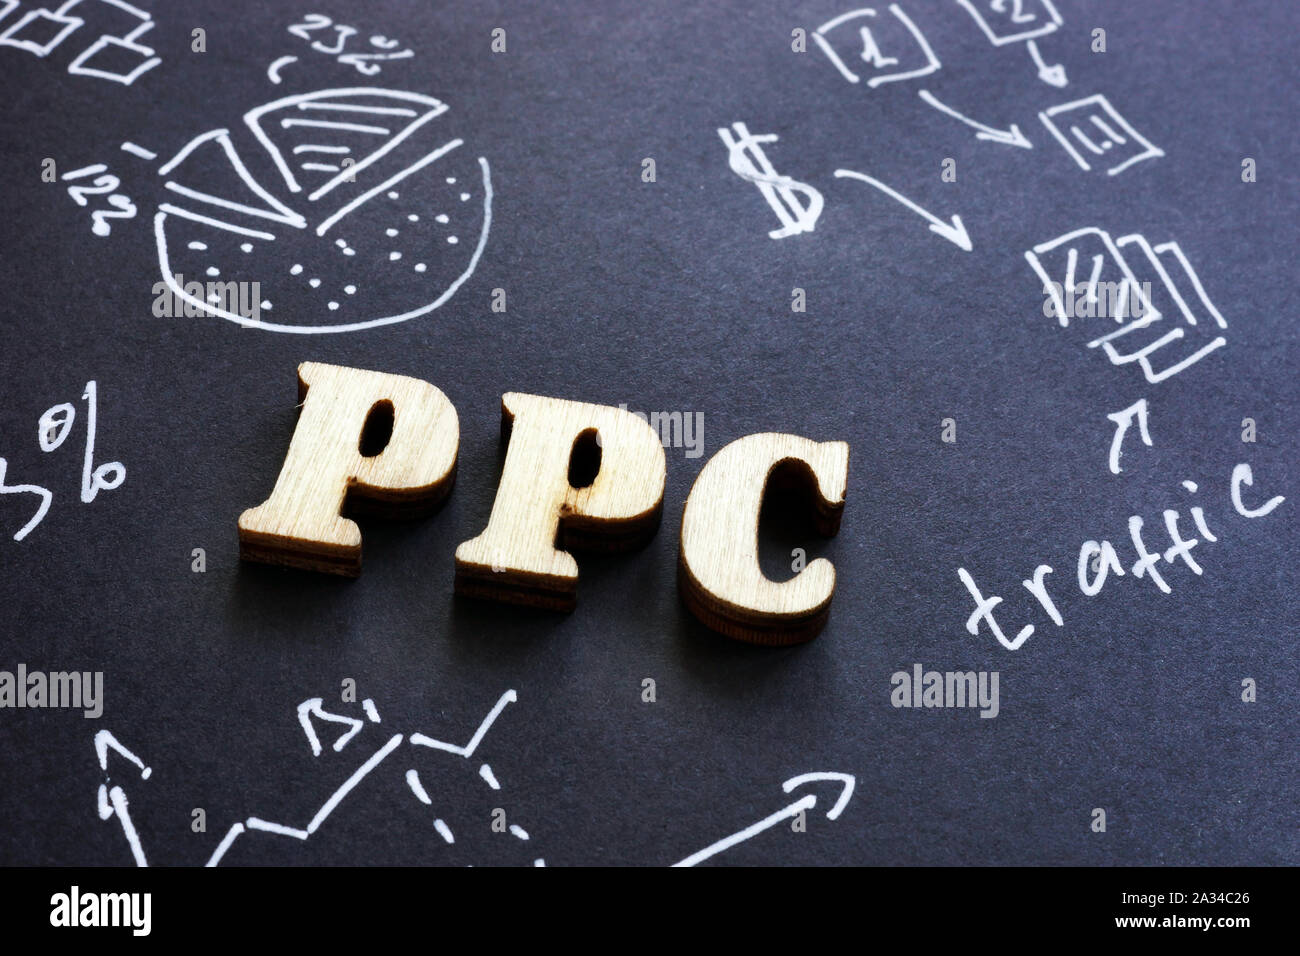 PPC pay per click sign on black paper. Stock Photo